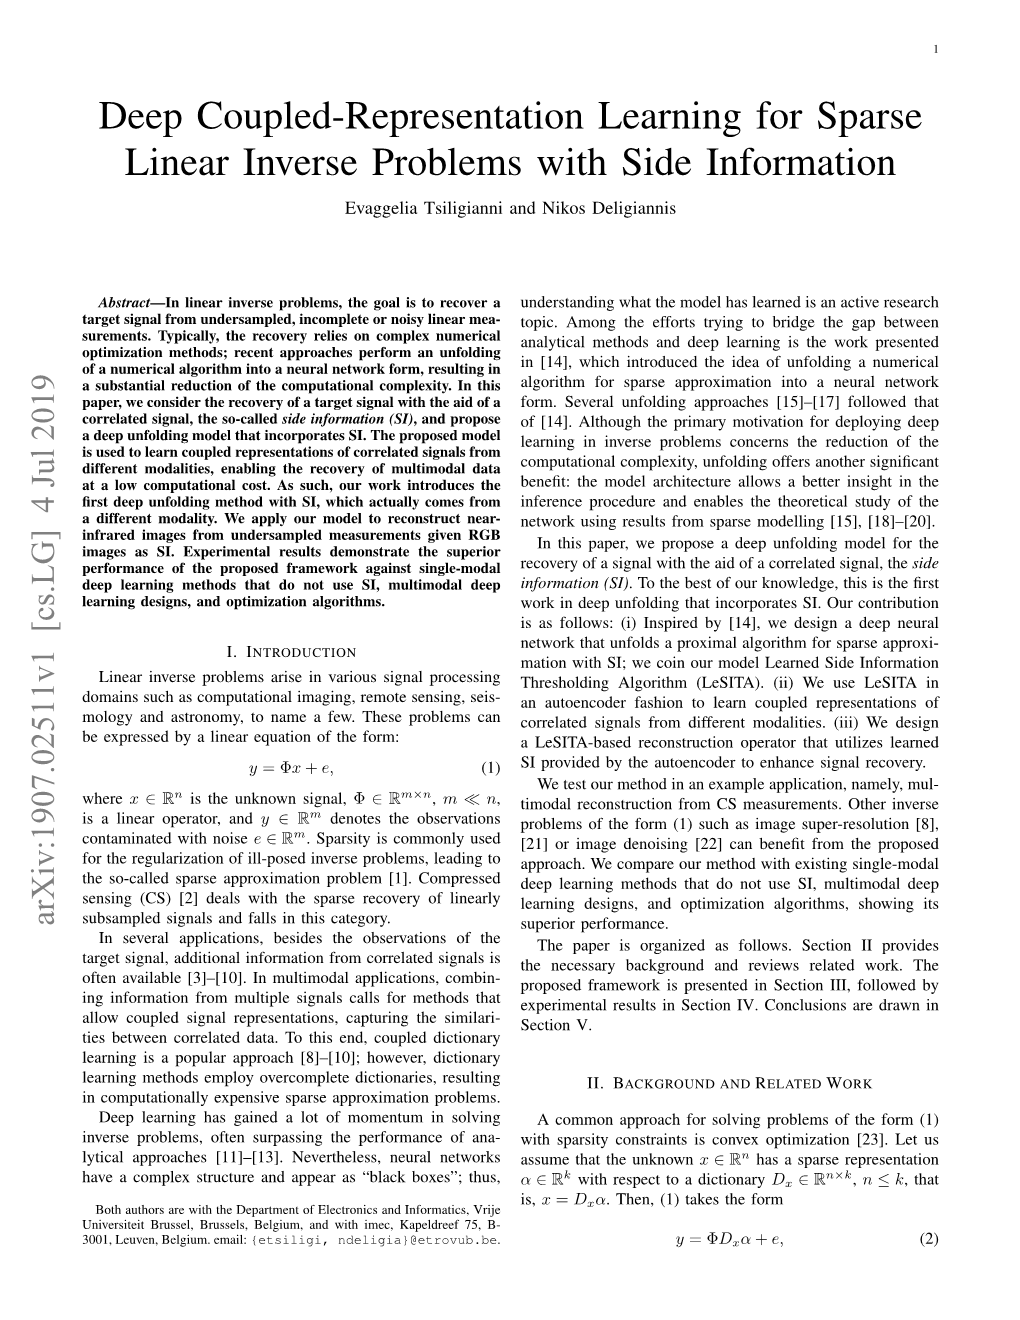 Deep Coupled-Representation Learning for Sparse Linear Inverse Problems with Side Information Evaggelia Tsiligianni and Nikos Deligiannis